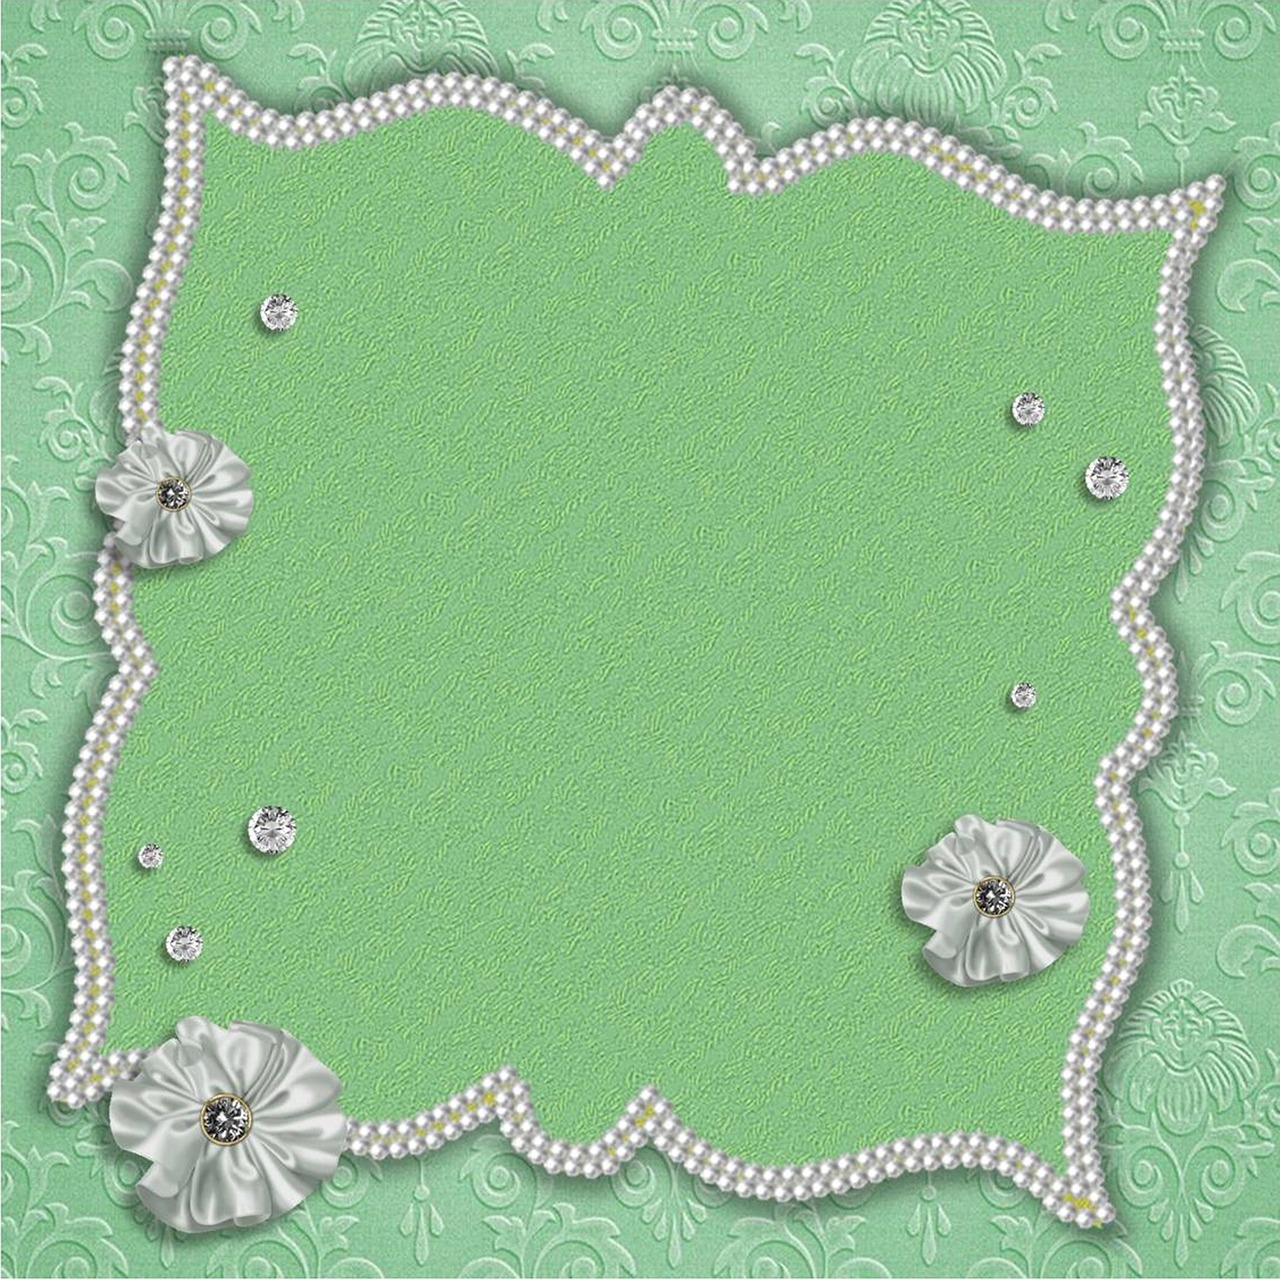 guestbook green beads free photo